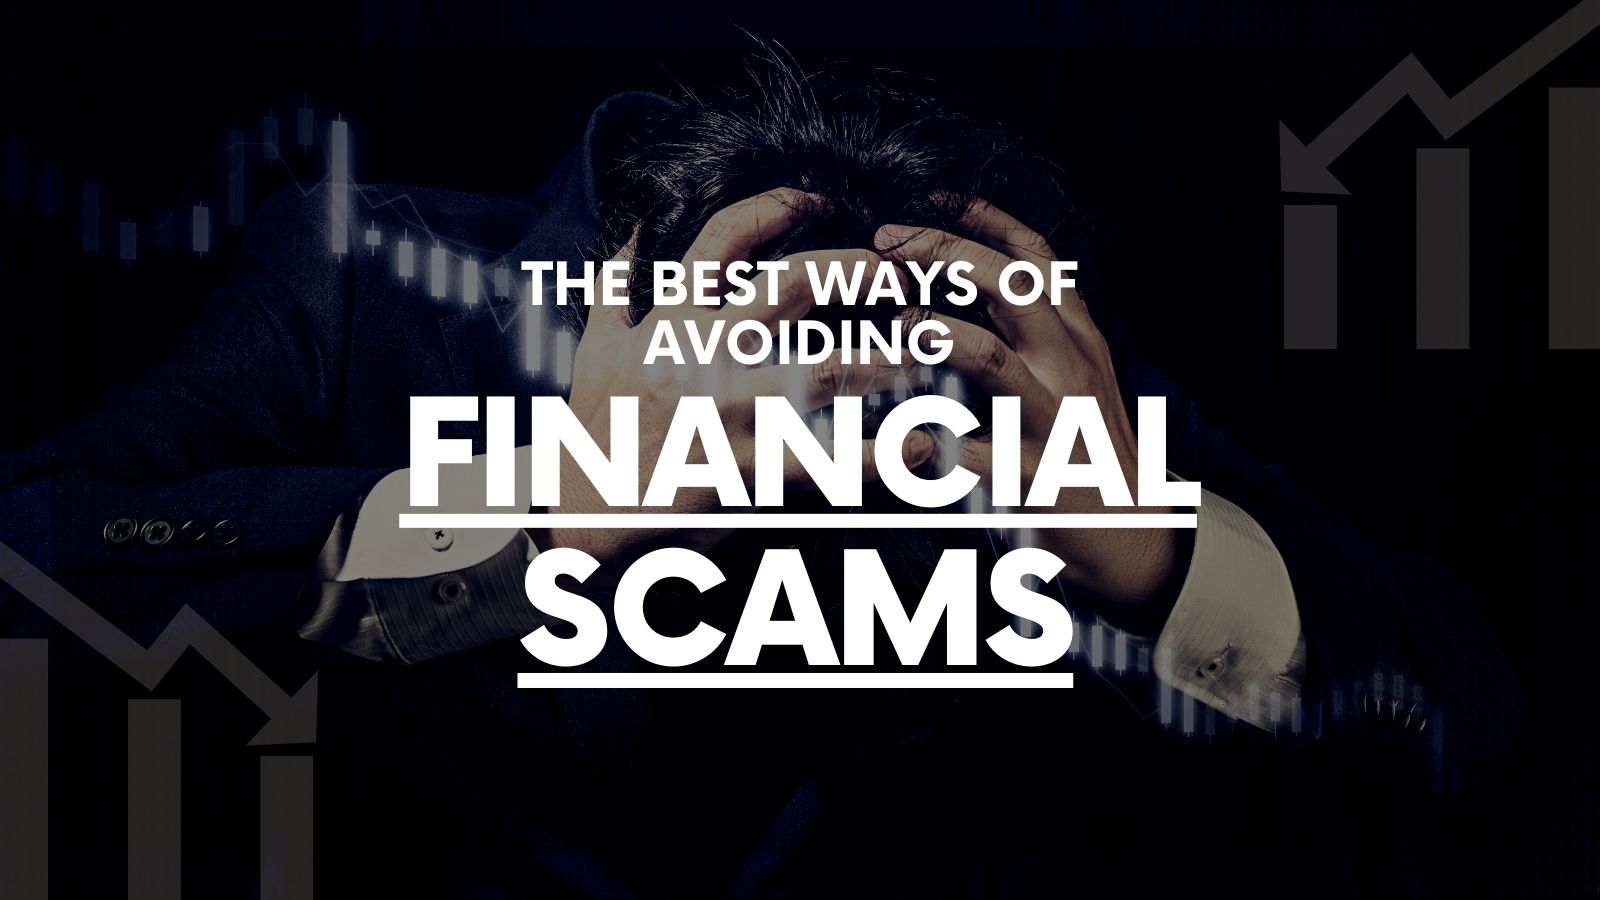 What are the ways of avoiding financial scams